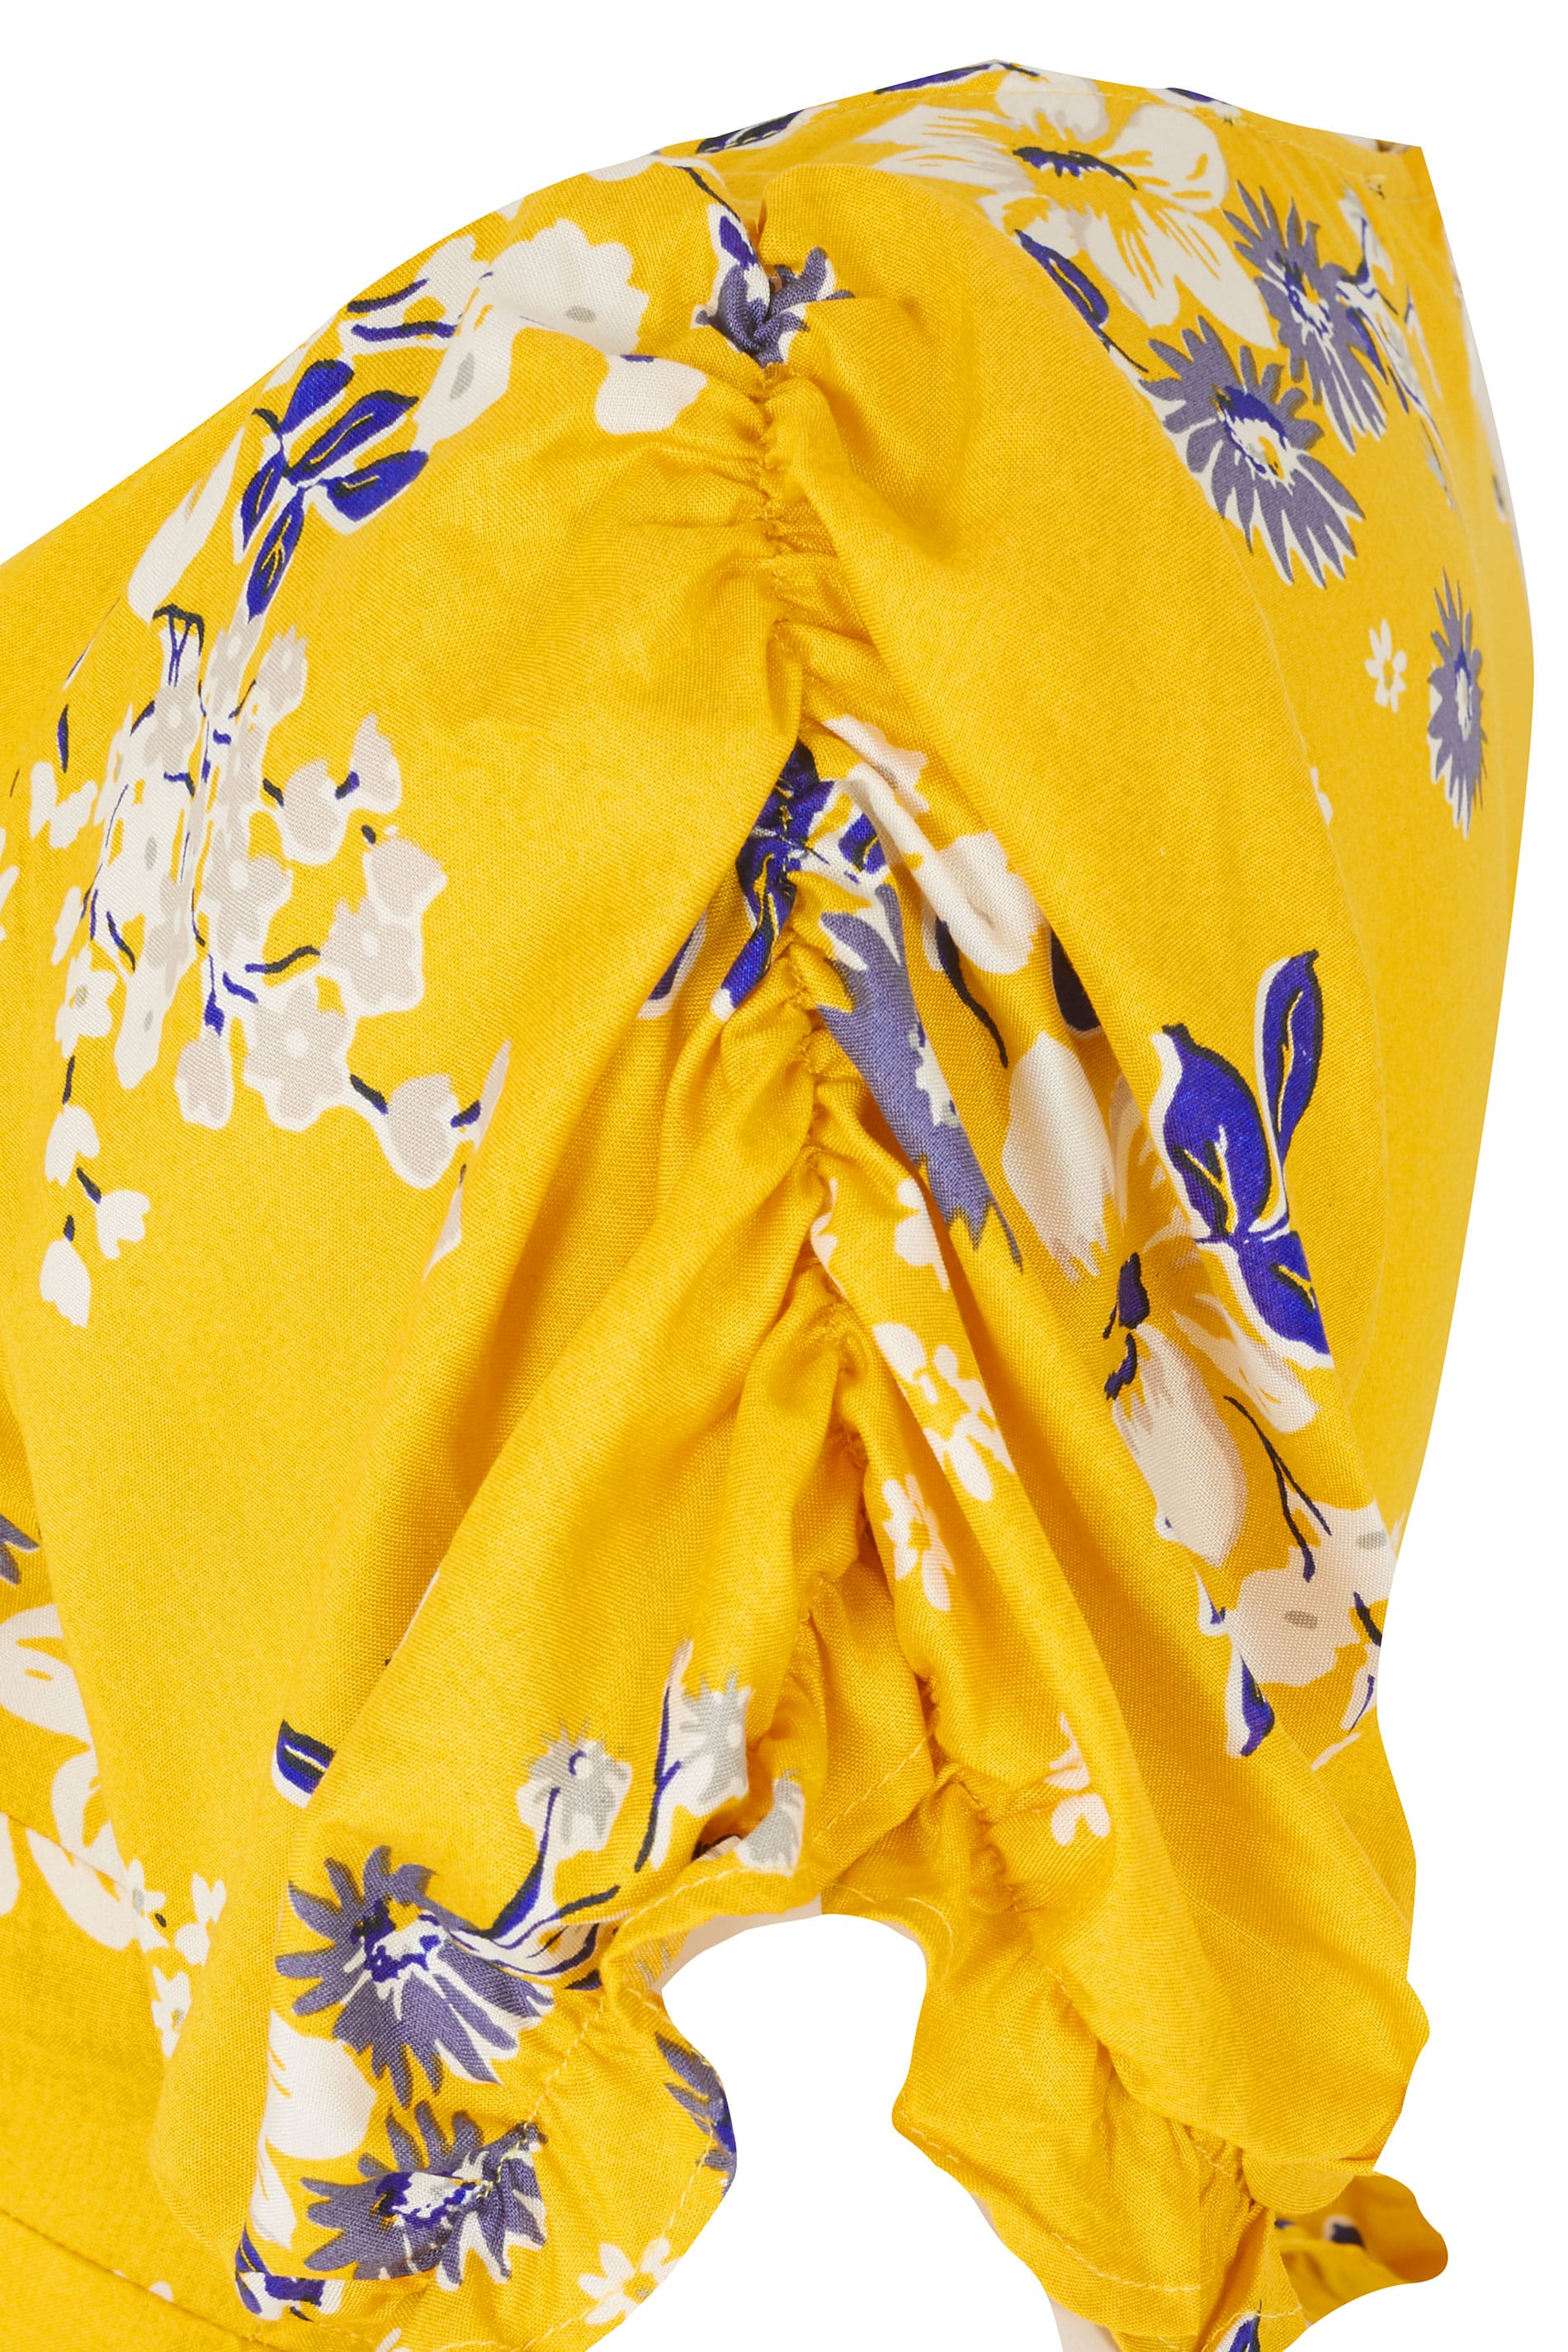 YOURS LONDON Yellow Floral Tea Dress, Plus size 16 to 32